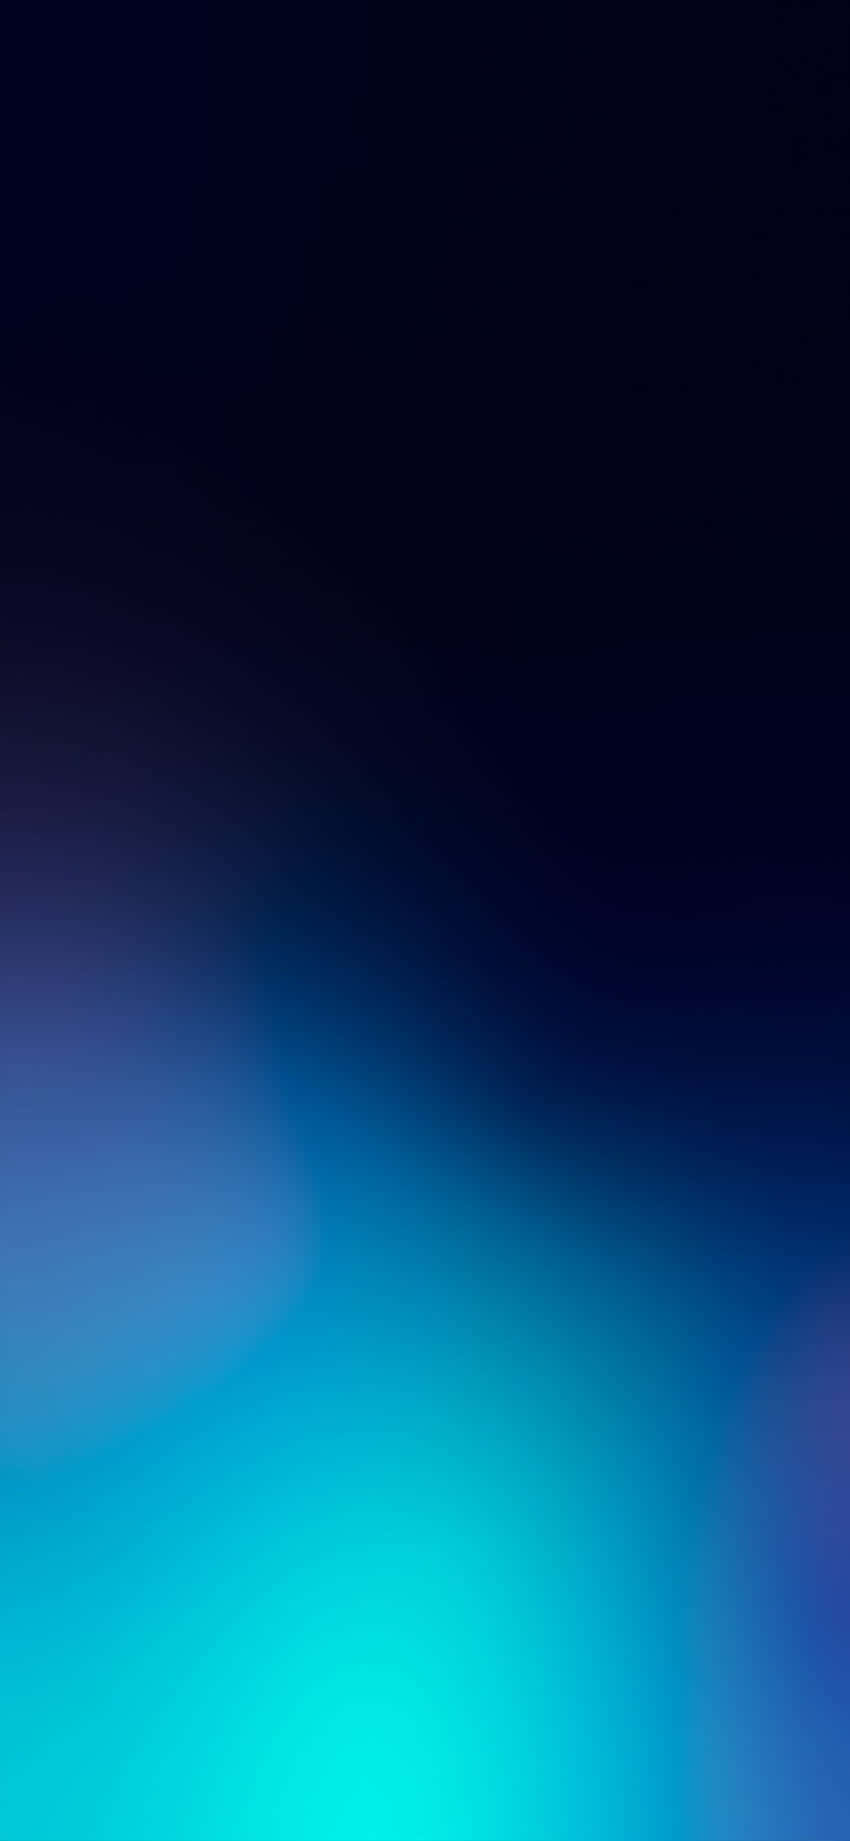 Dark Blue Ombre Isolated on a White Background Wallpaper